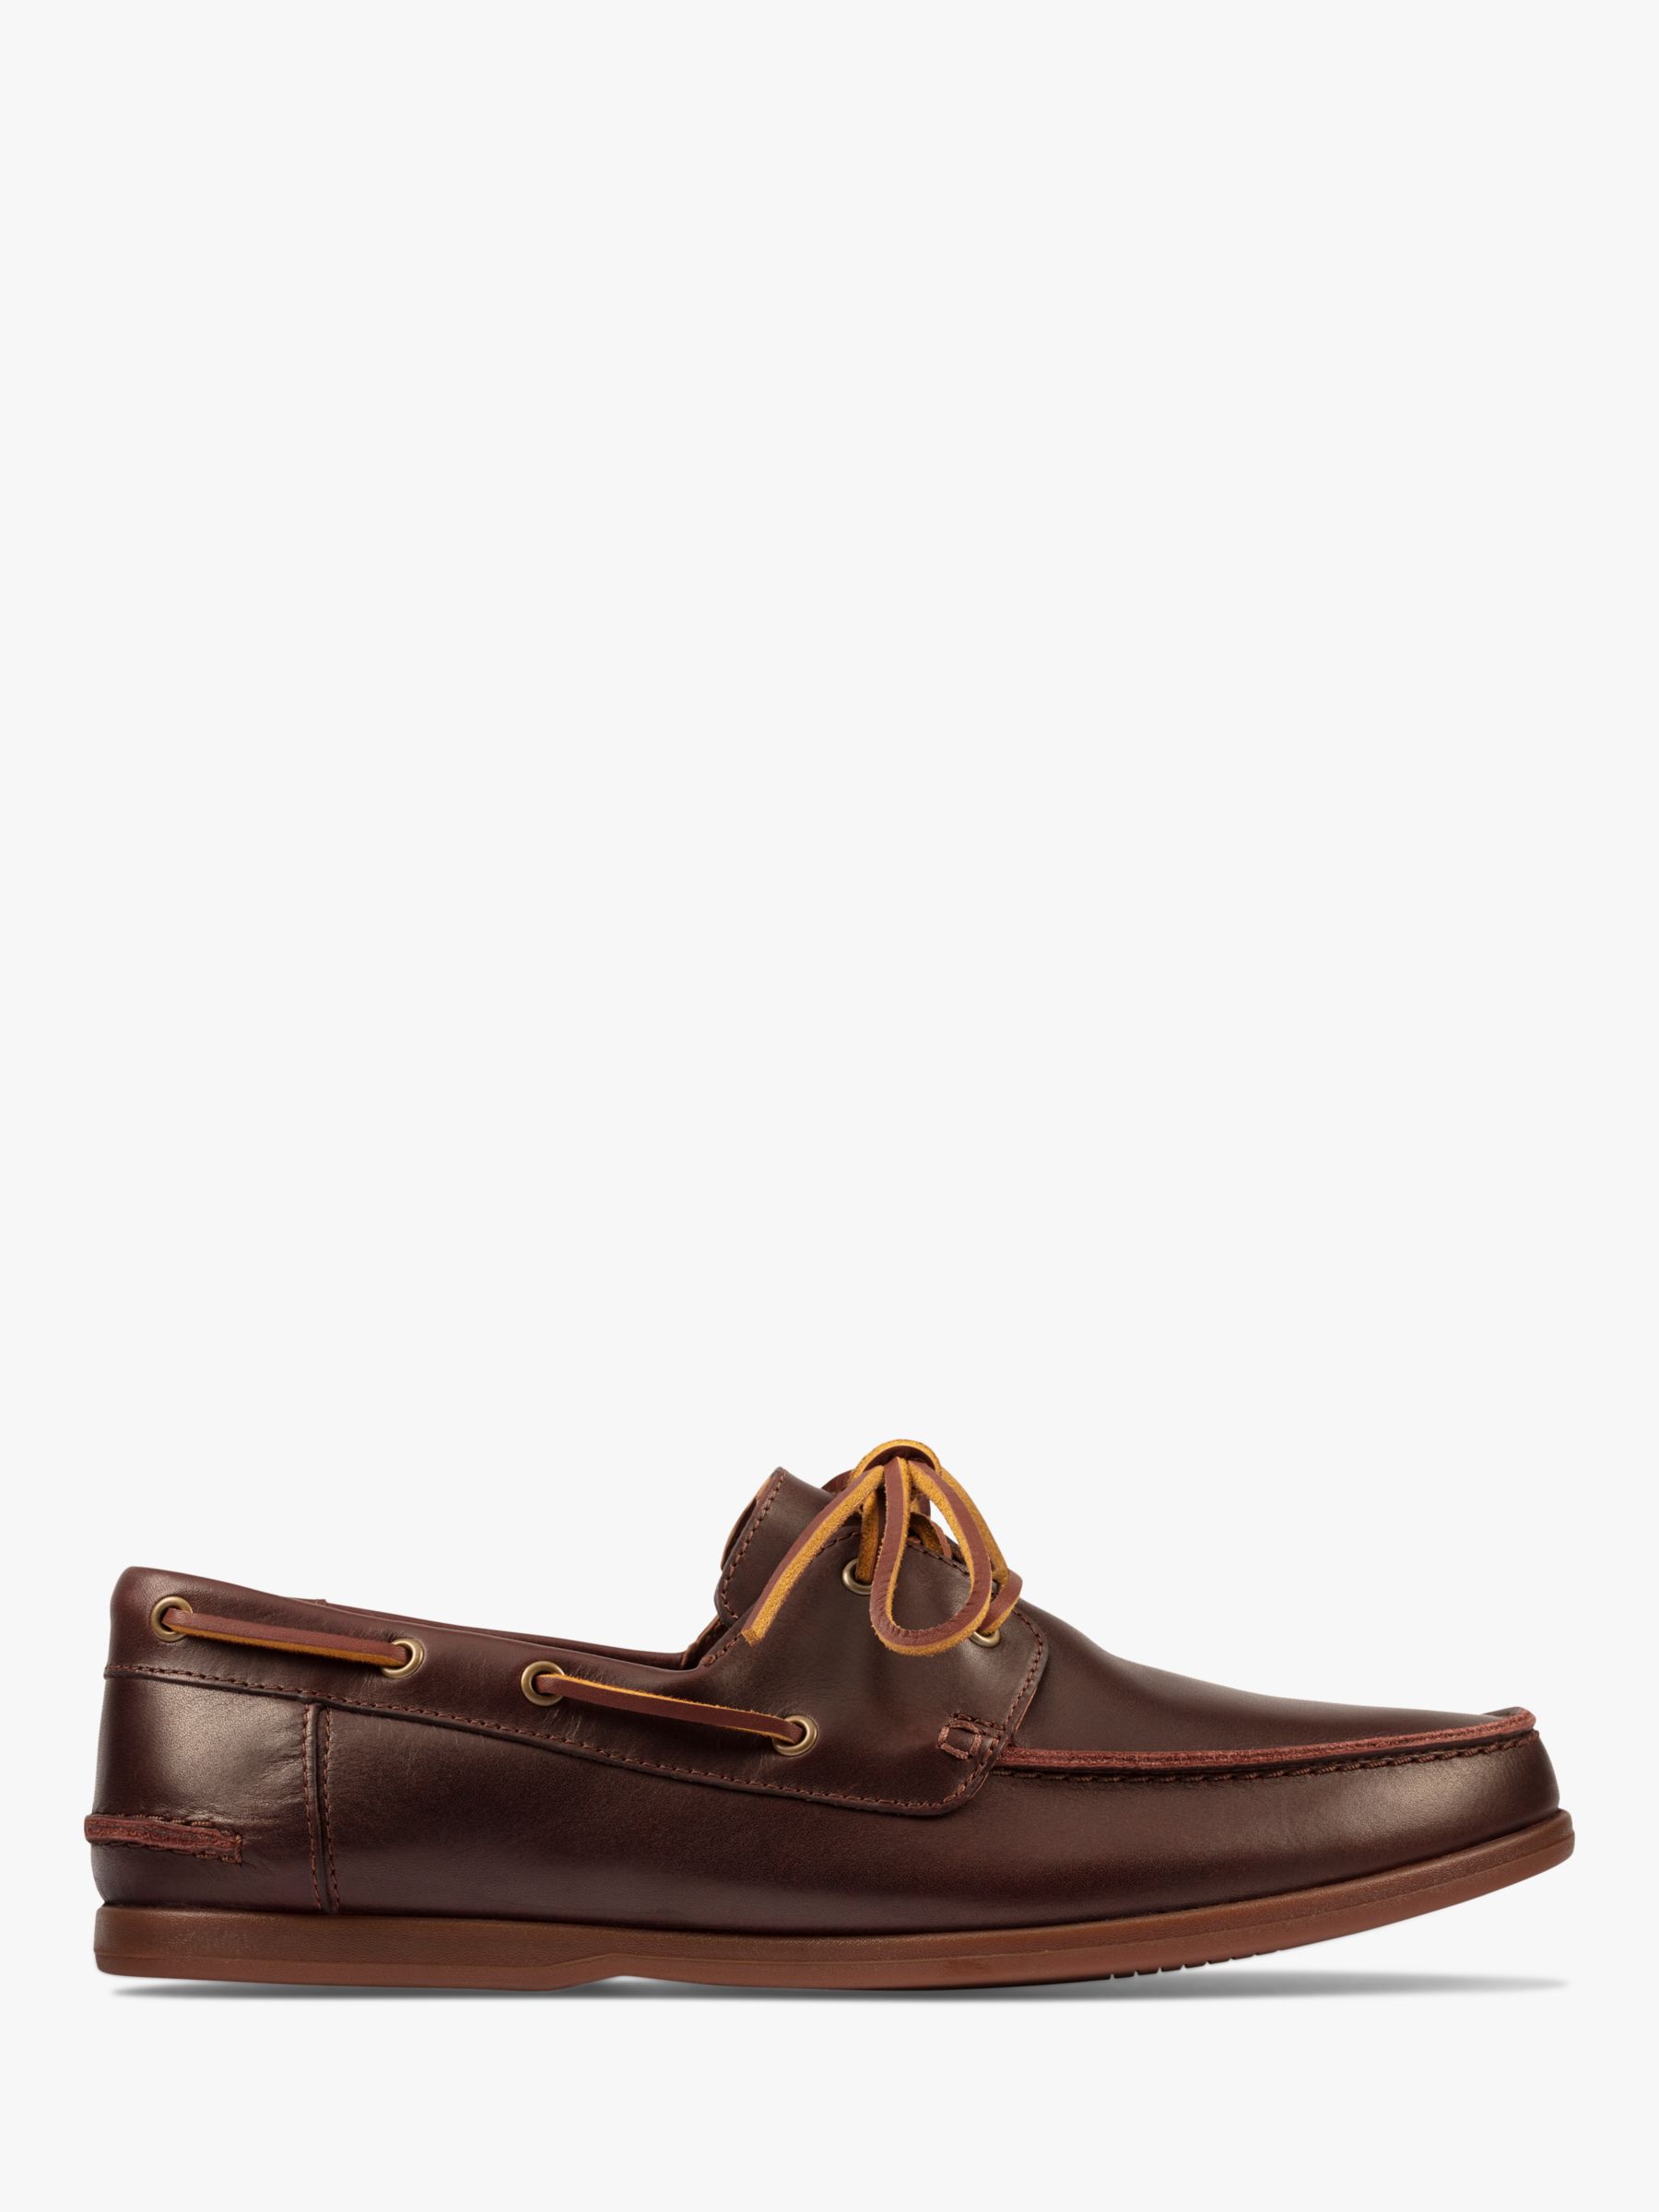 Clarks Pickwell Sail Leather Boat Shoes, Tan at John Lewis & Partners